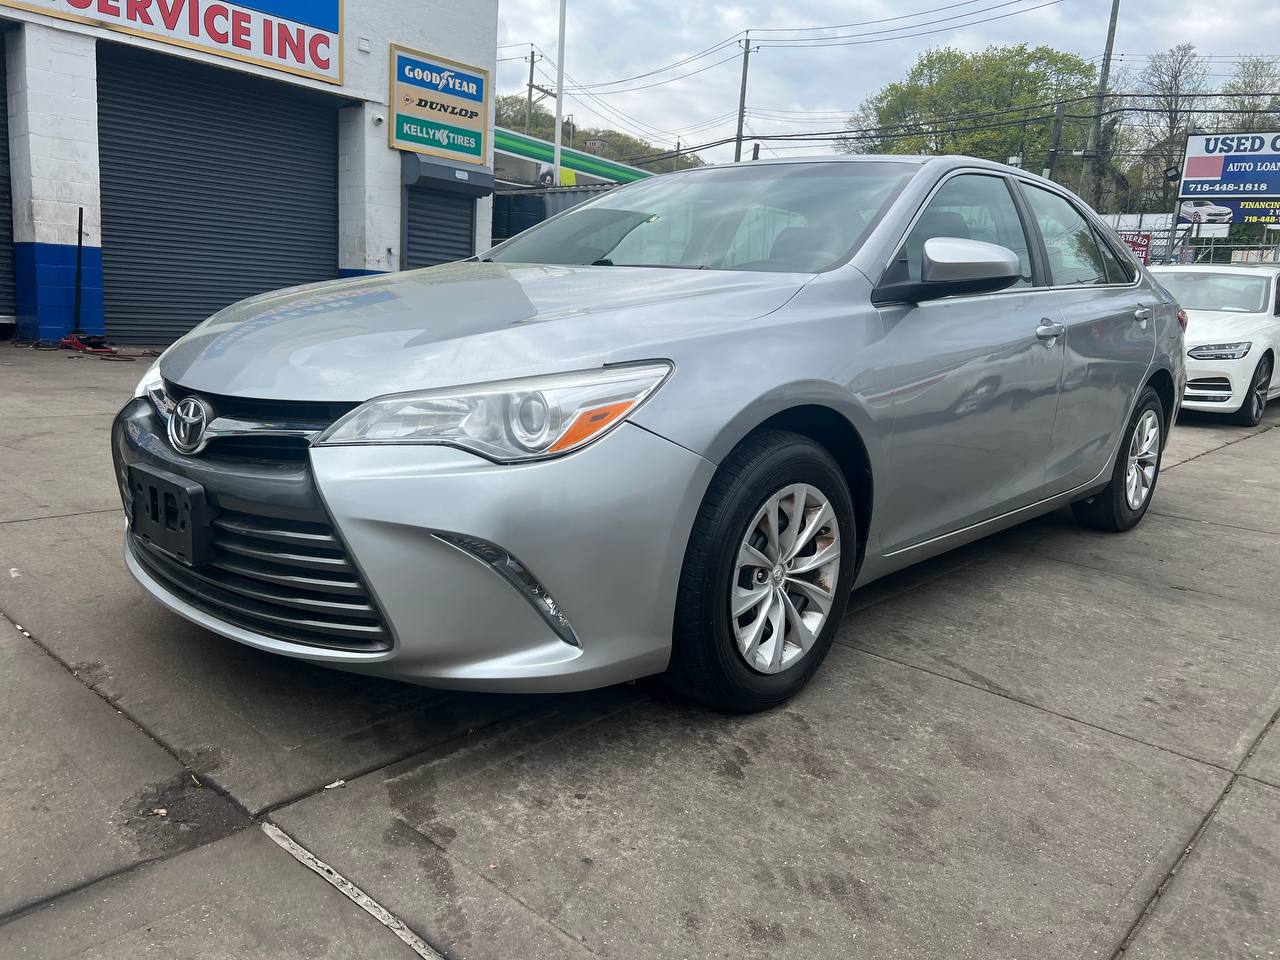 Used Car - 2017 Toyota Camry LE for Sale in Staten Island, NY